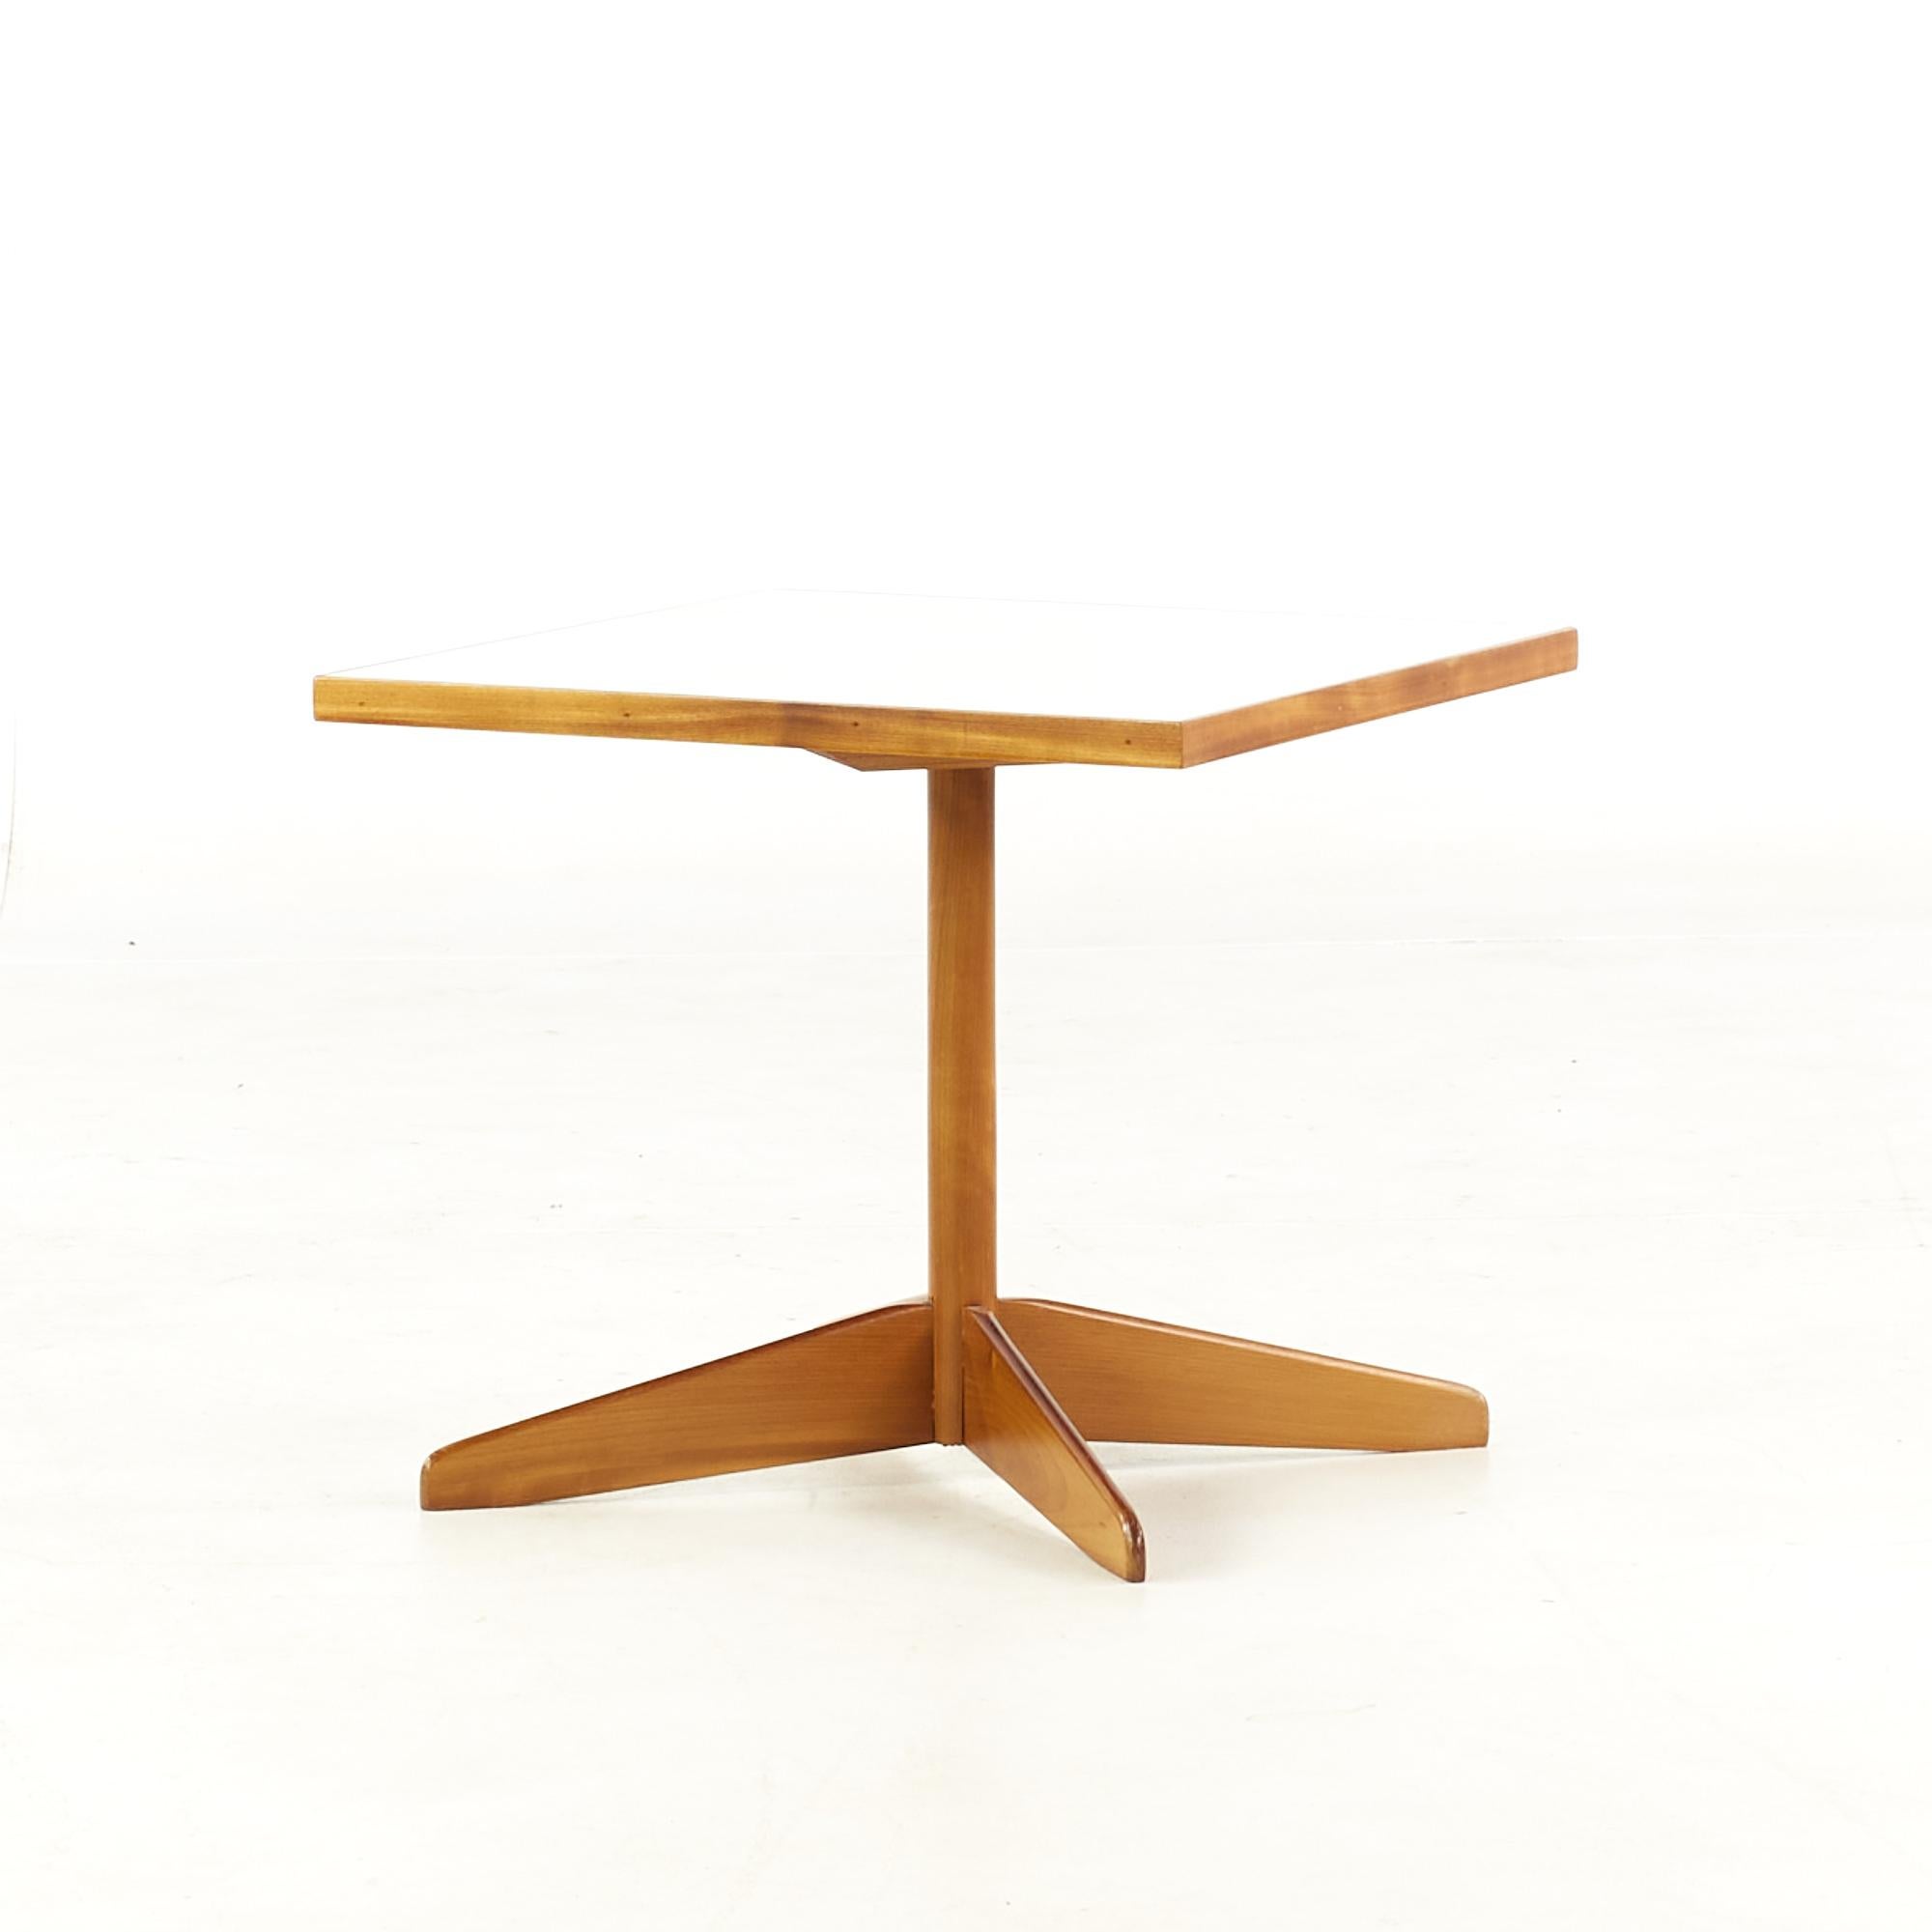 Late 20th Century Edward Wormley Style Mid-Century Walnut and White Laminate End Tables, Pair For Sale